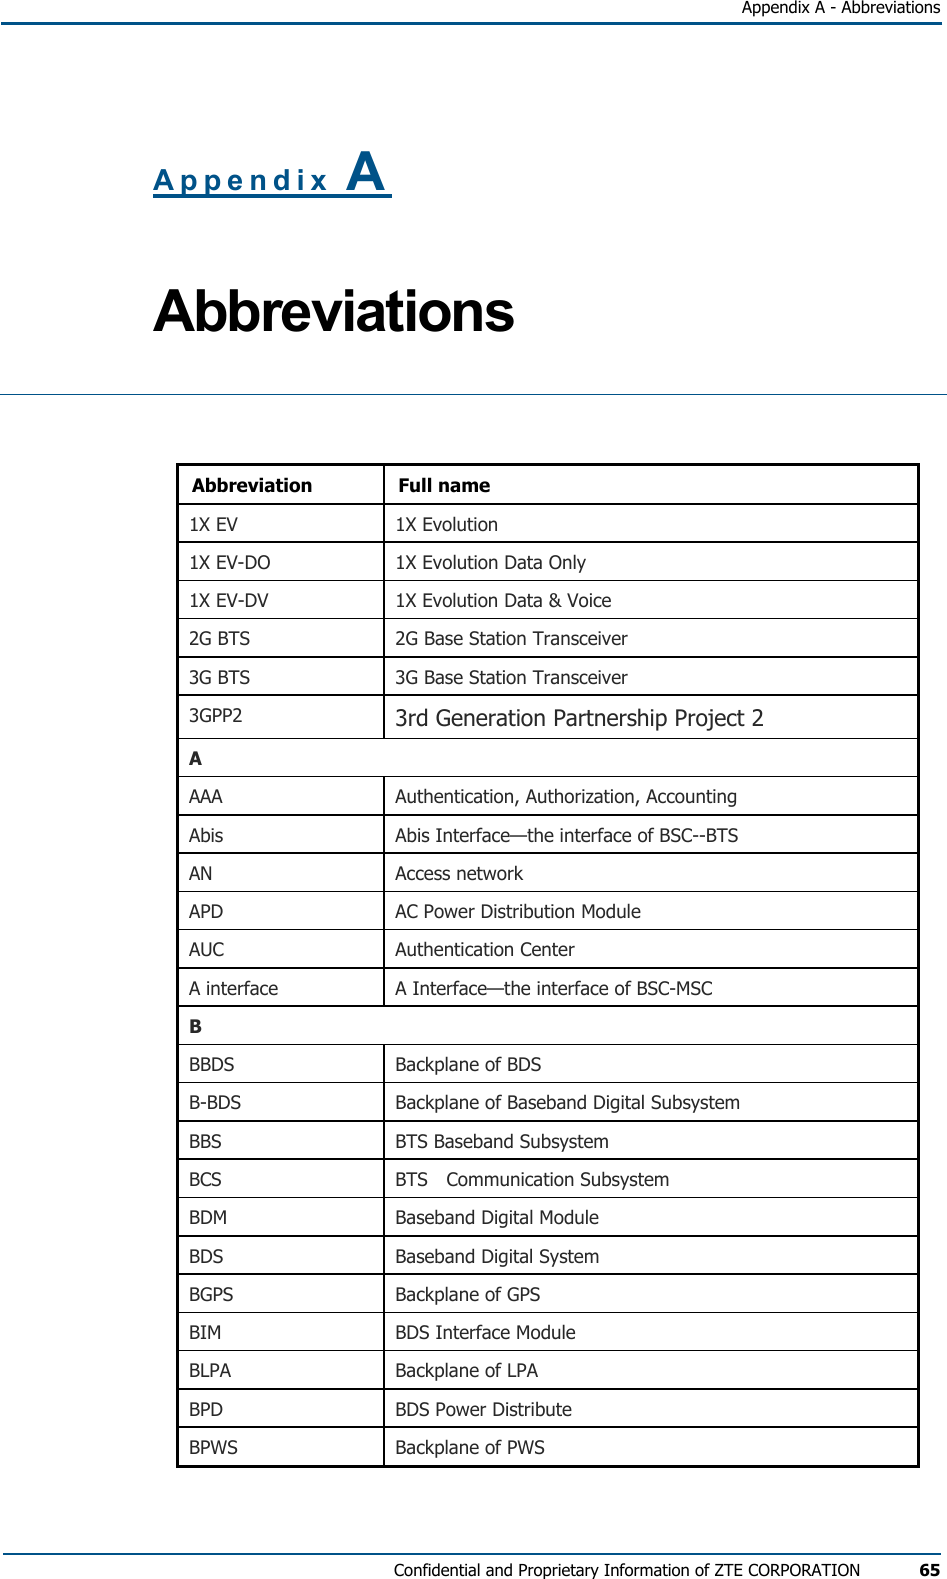   Appendix A - Abbreviations Confidential and Proprietary Information of ZTE CORPORATION 65 Appendix A Abbreviations  Abbreviation Full name 1X EV  1X Evolution 1X EV-DO  1X Evolution Data Only 1X EV-DV  1X Evolution Data &amp; Voice 2G BTS  2G Base Station Transceiver 3G BTS  3G Base Station Transceiver 3GPP2  3rd Generation Partnership Project 2 A AAA Authentication, Authorization, Accounting Abis Abis Interface—the interface of BSC--BTS AN Access network APD  AC Power Distribution Module AUC Authentication Center A interface   A Interface—the interface of BSC-MSC B BBDS  Backplane of BDS B-BDS  Backplane of Baseband Digital Subsystem BBS  BTS Baseband Subsystem BCS BTS Communication Subsystem BDM  Baseband Digital Module BDS  Baseband Digital System BGPS  Backplane of GPS BIM  BDS Interface Module BLPA  Backplane of LPA BPD  BDS Power Distribute BPWS  Backplane of PWS 